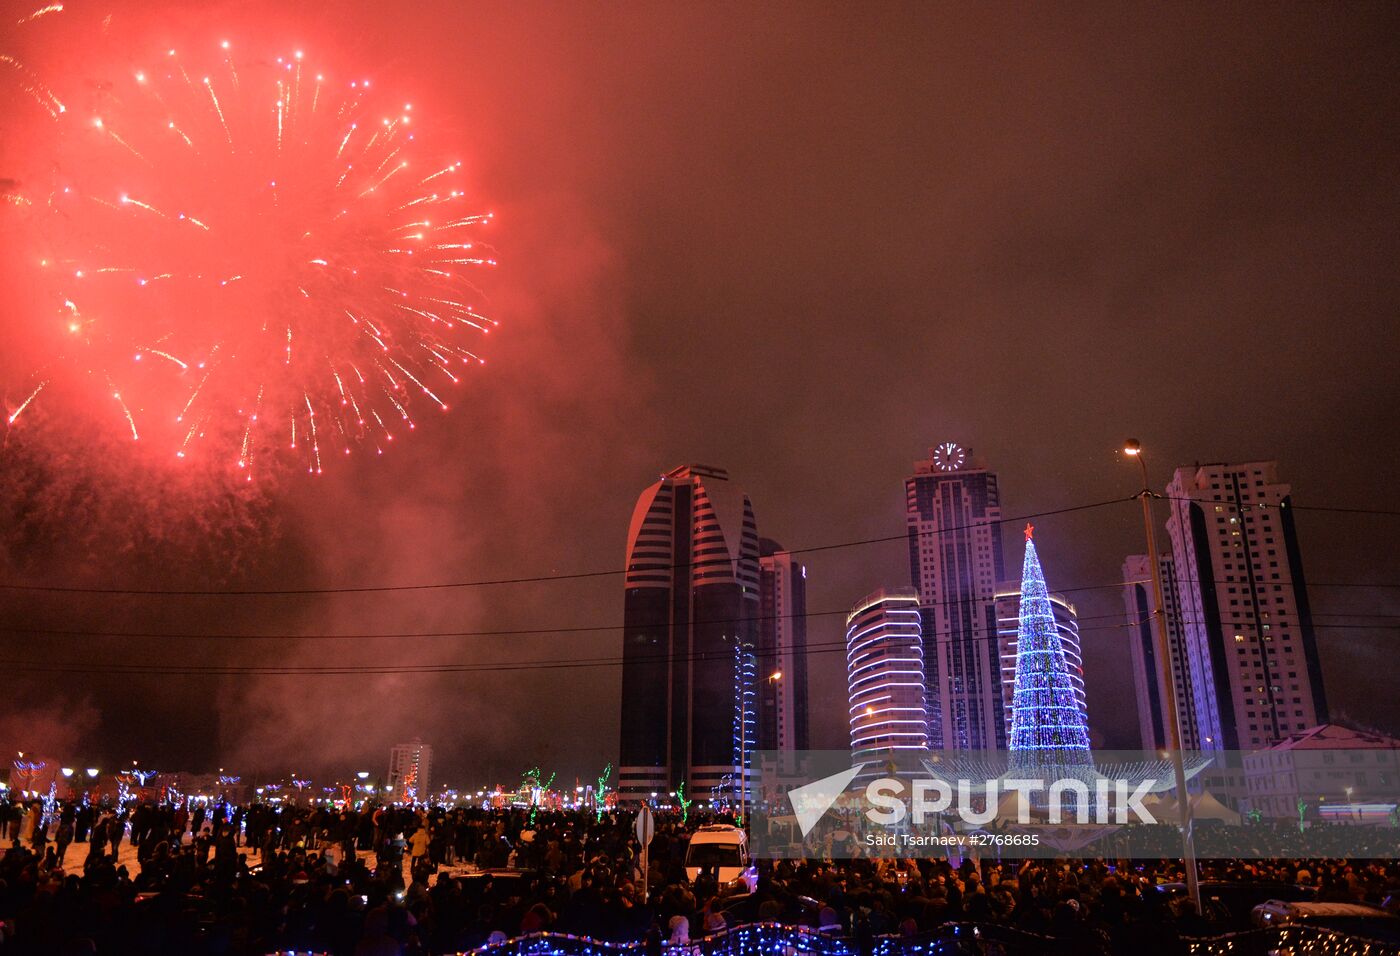 New Year celebrations in Russian cities